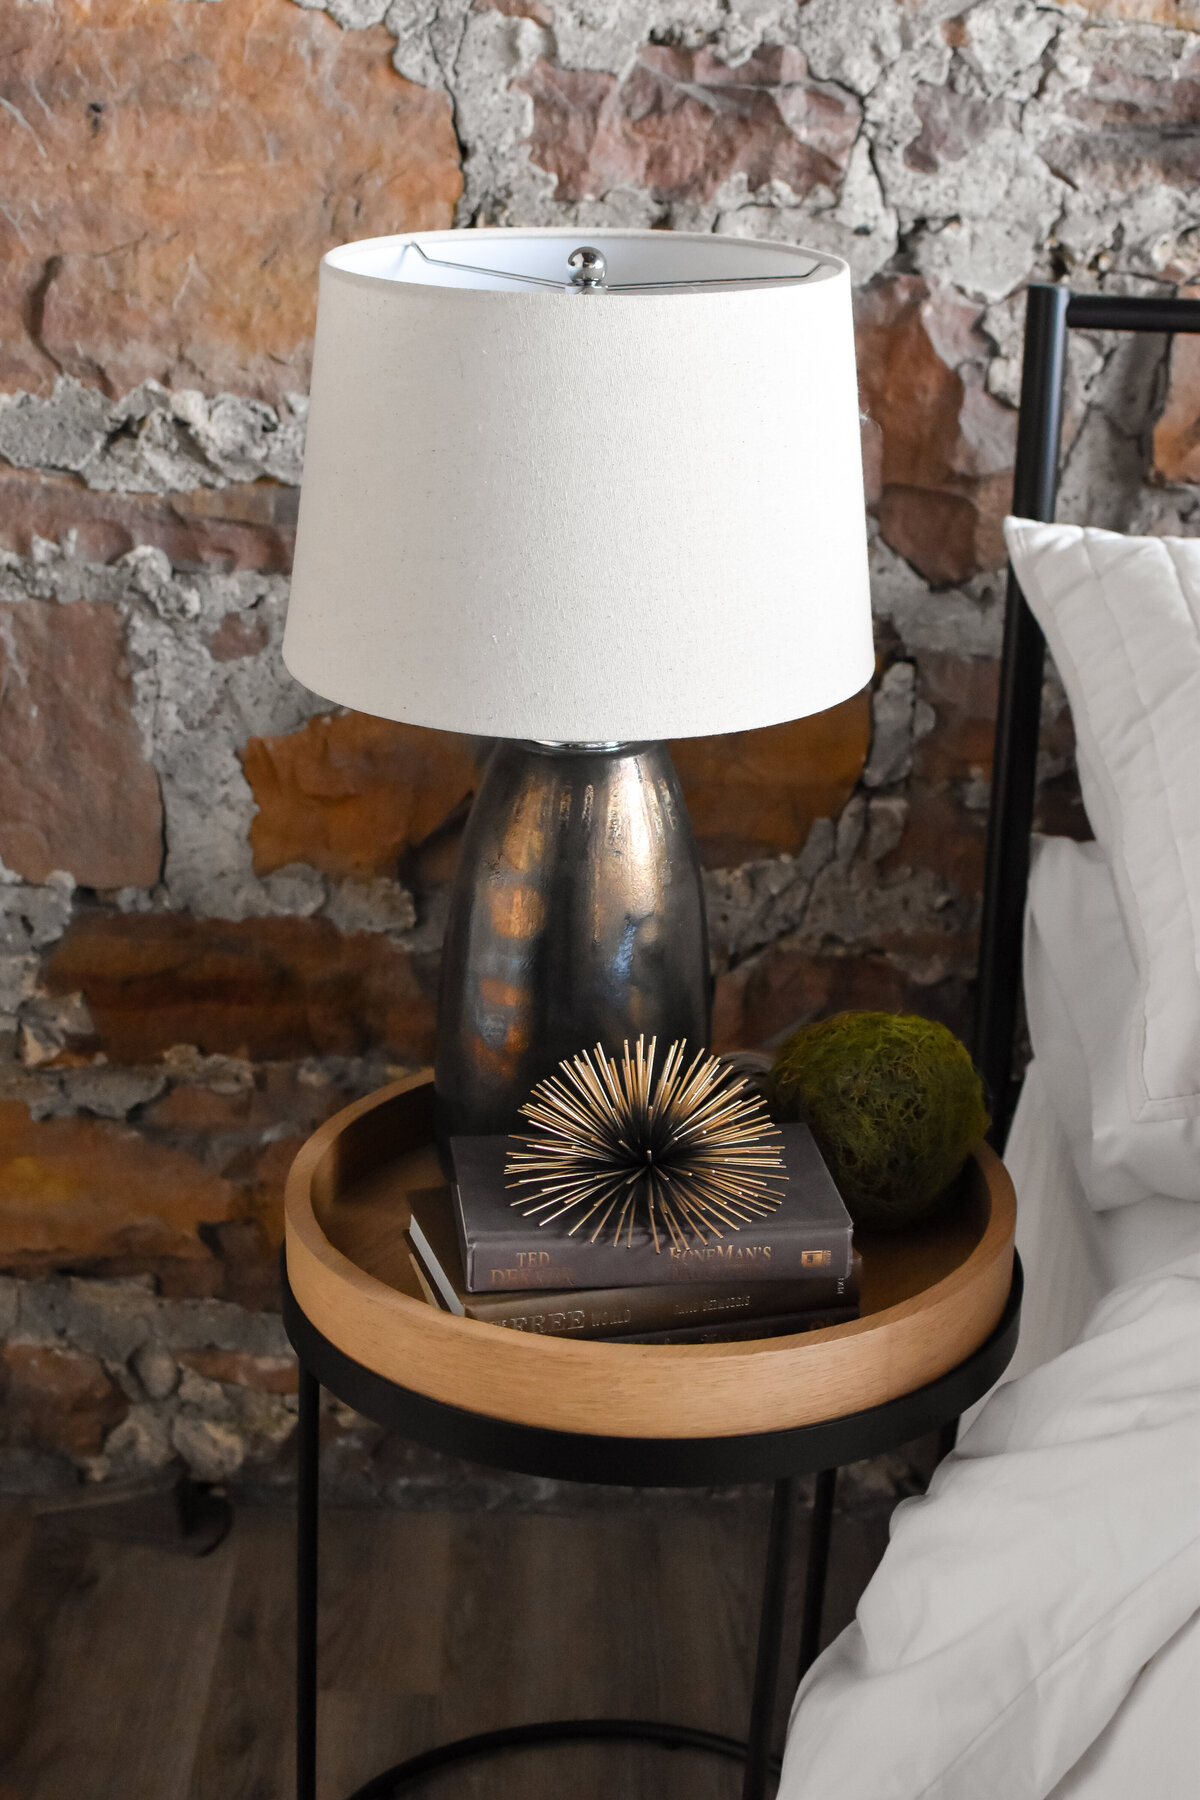 A small lamp sits on a style bedroom end table